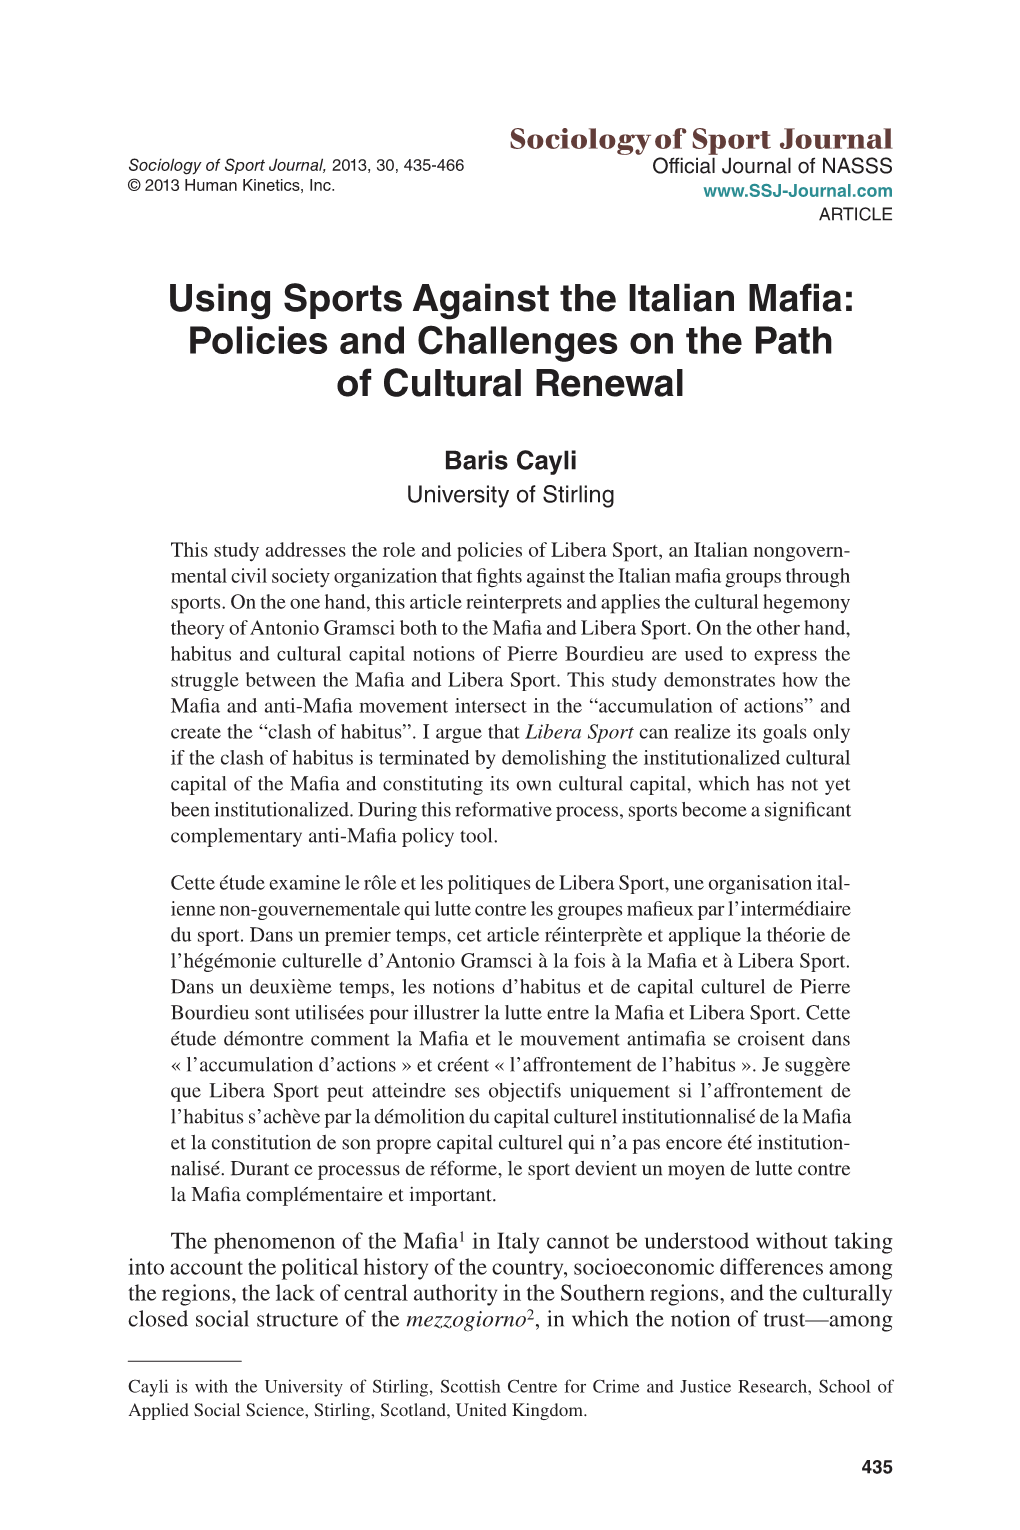 Using Sports Against the Italian Mafia: Policies and Challenges on the Path of Cultural Renewal